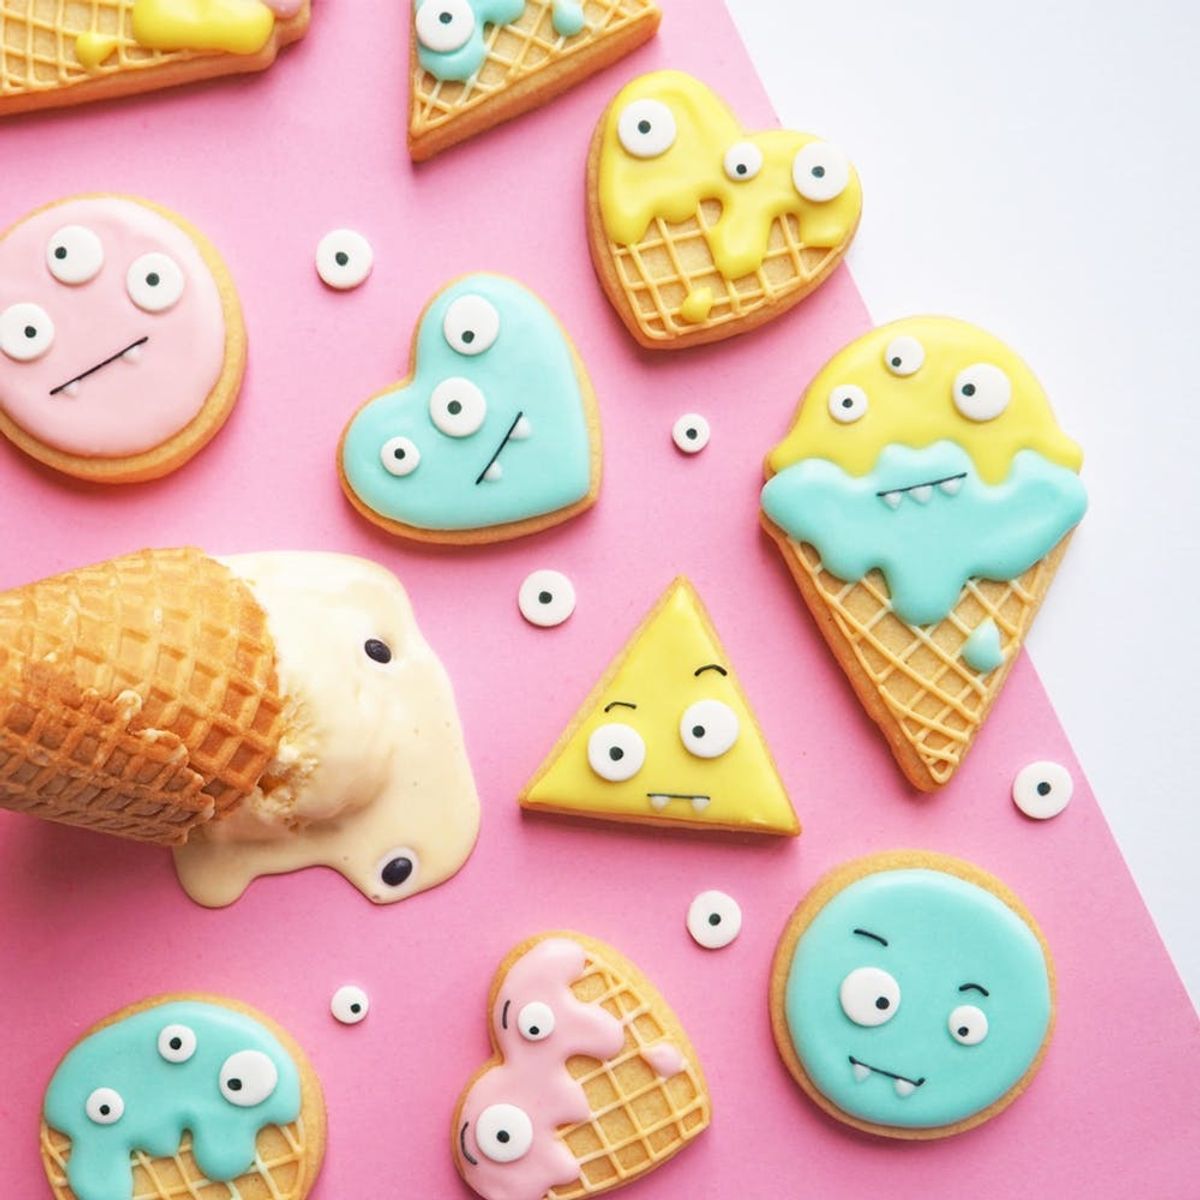 Sink Your Teeth into These Monster Eye-Scream Cookies